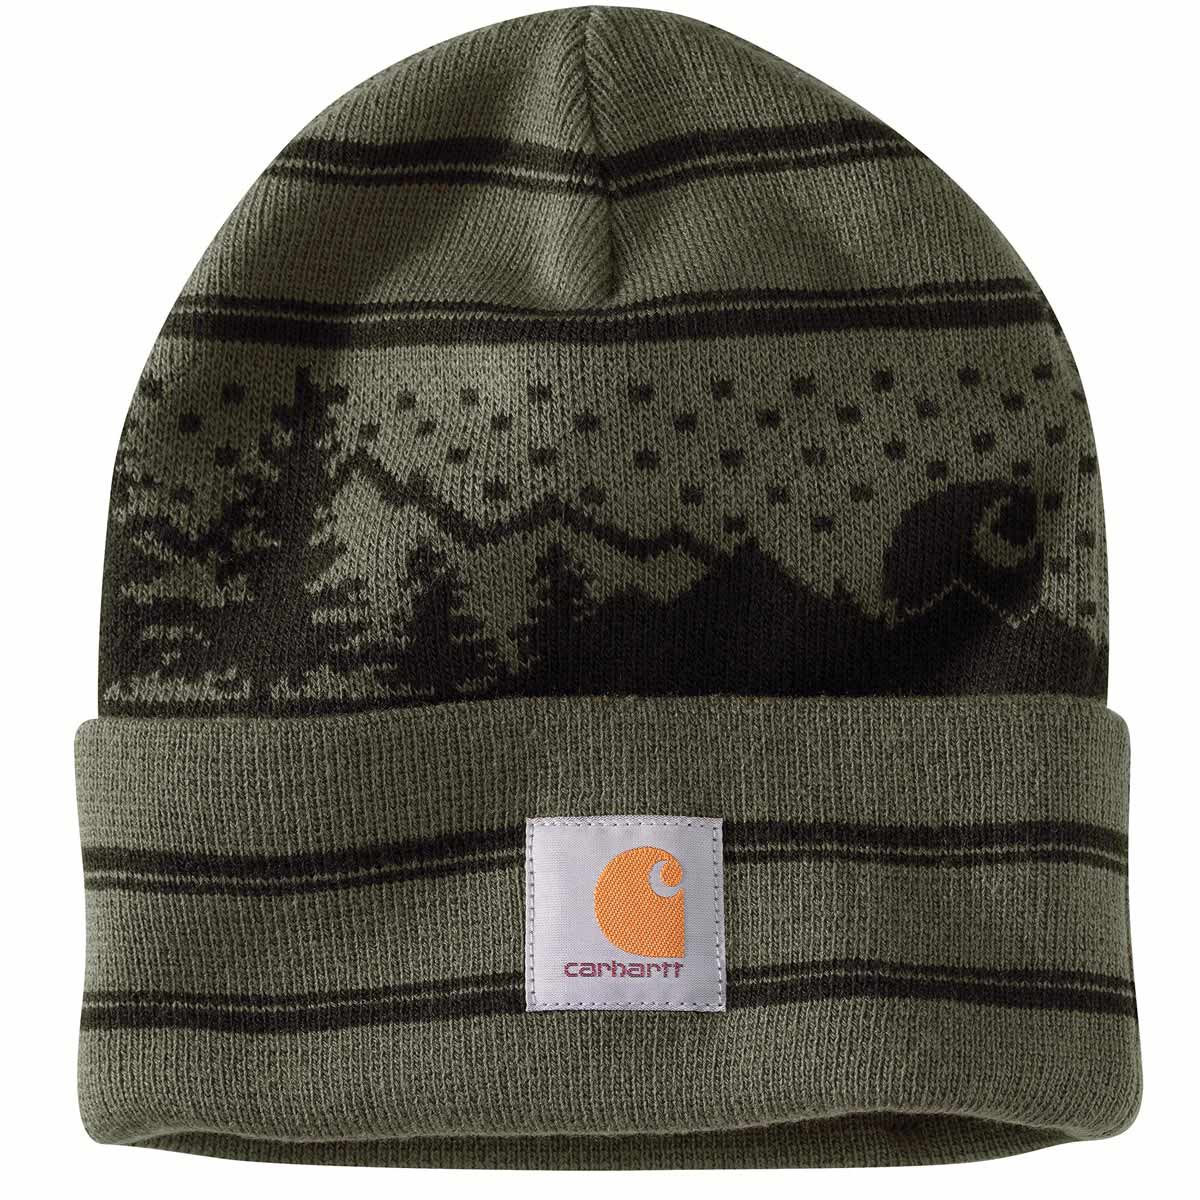 Carhartt Knit Outdoor Beanie - Discontinued Pricing